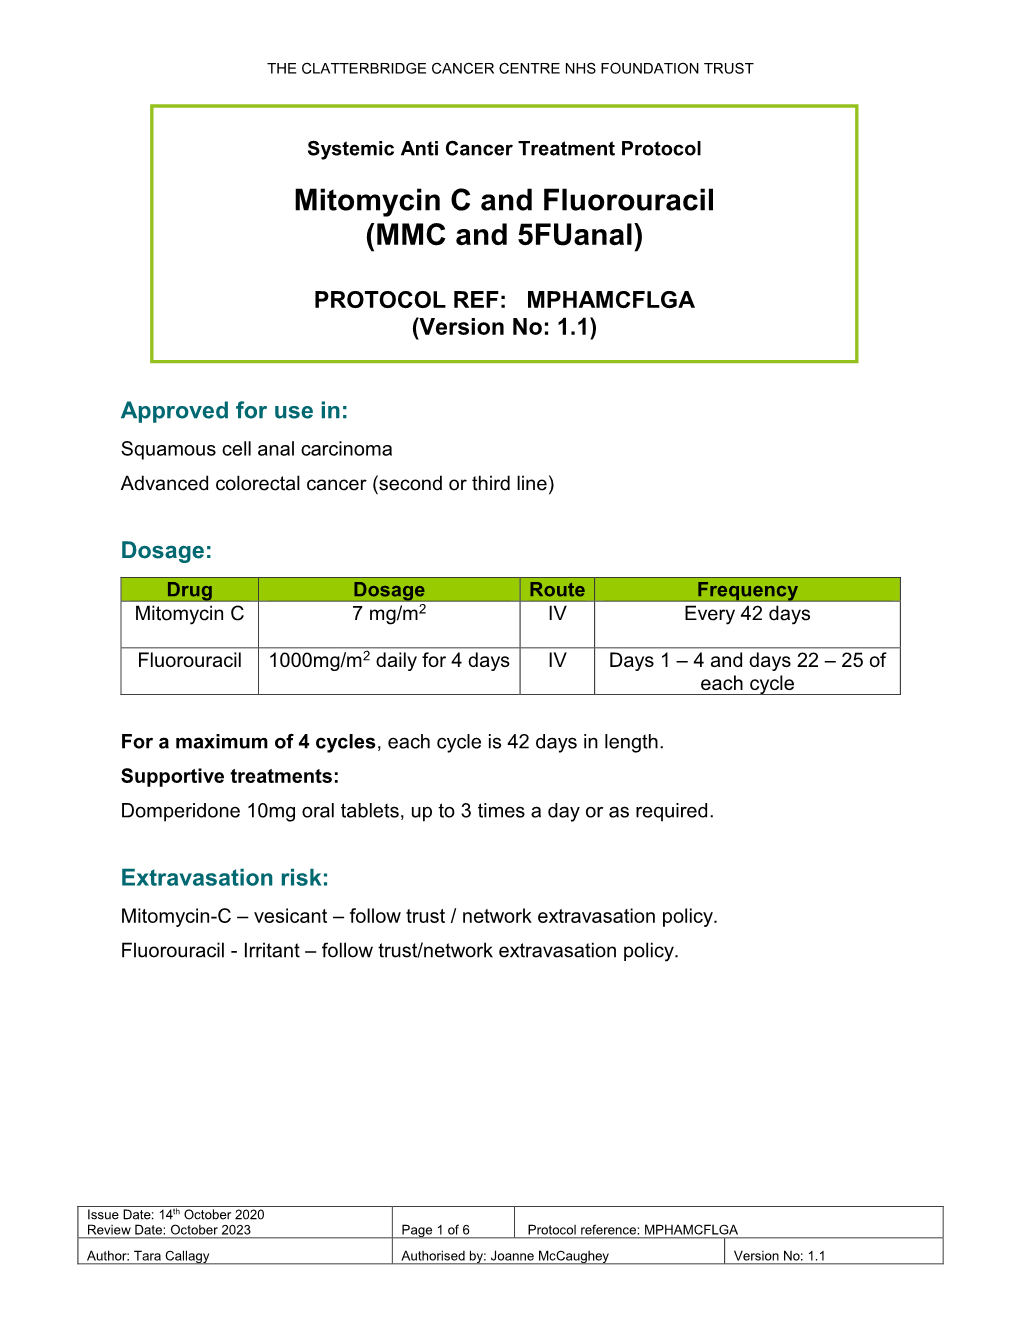 Mitomycin C and Fluorouracil (MMC and 5Fuanal)